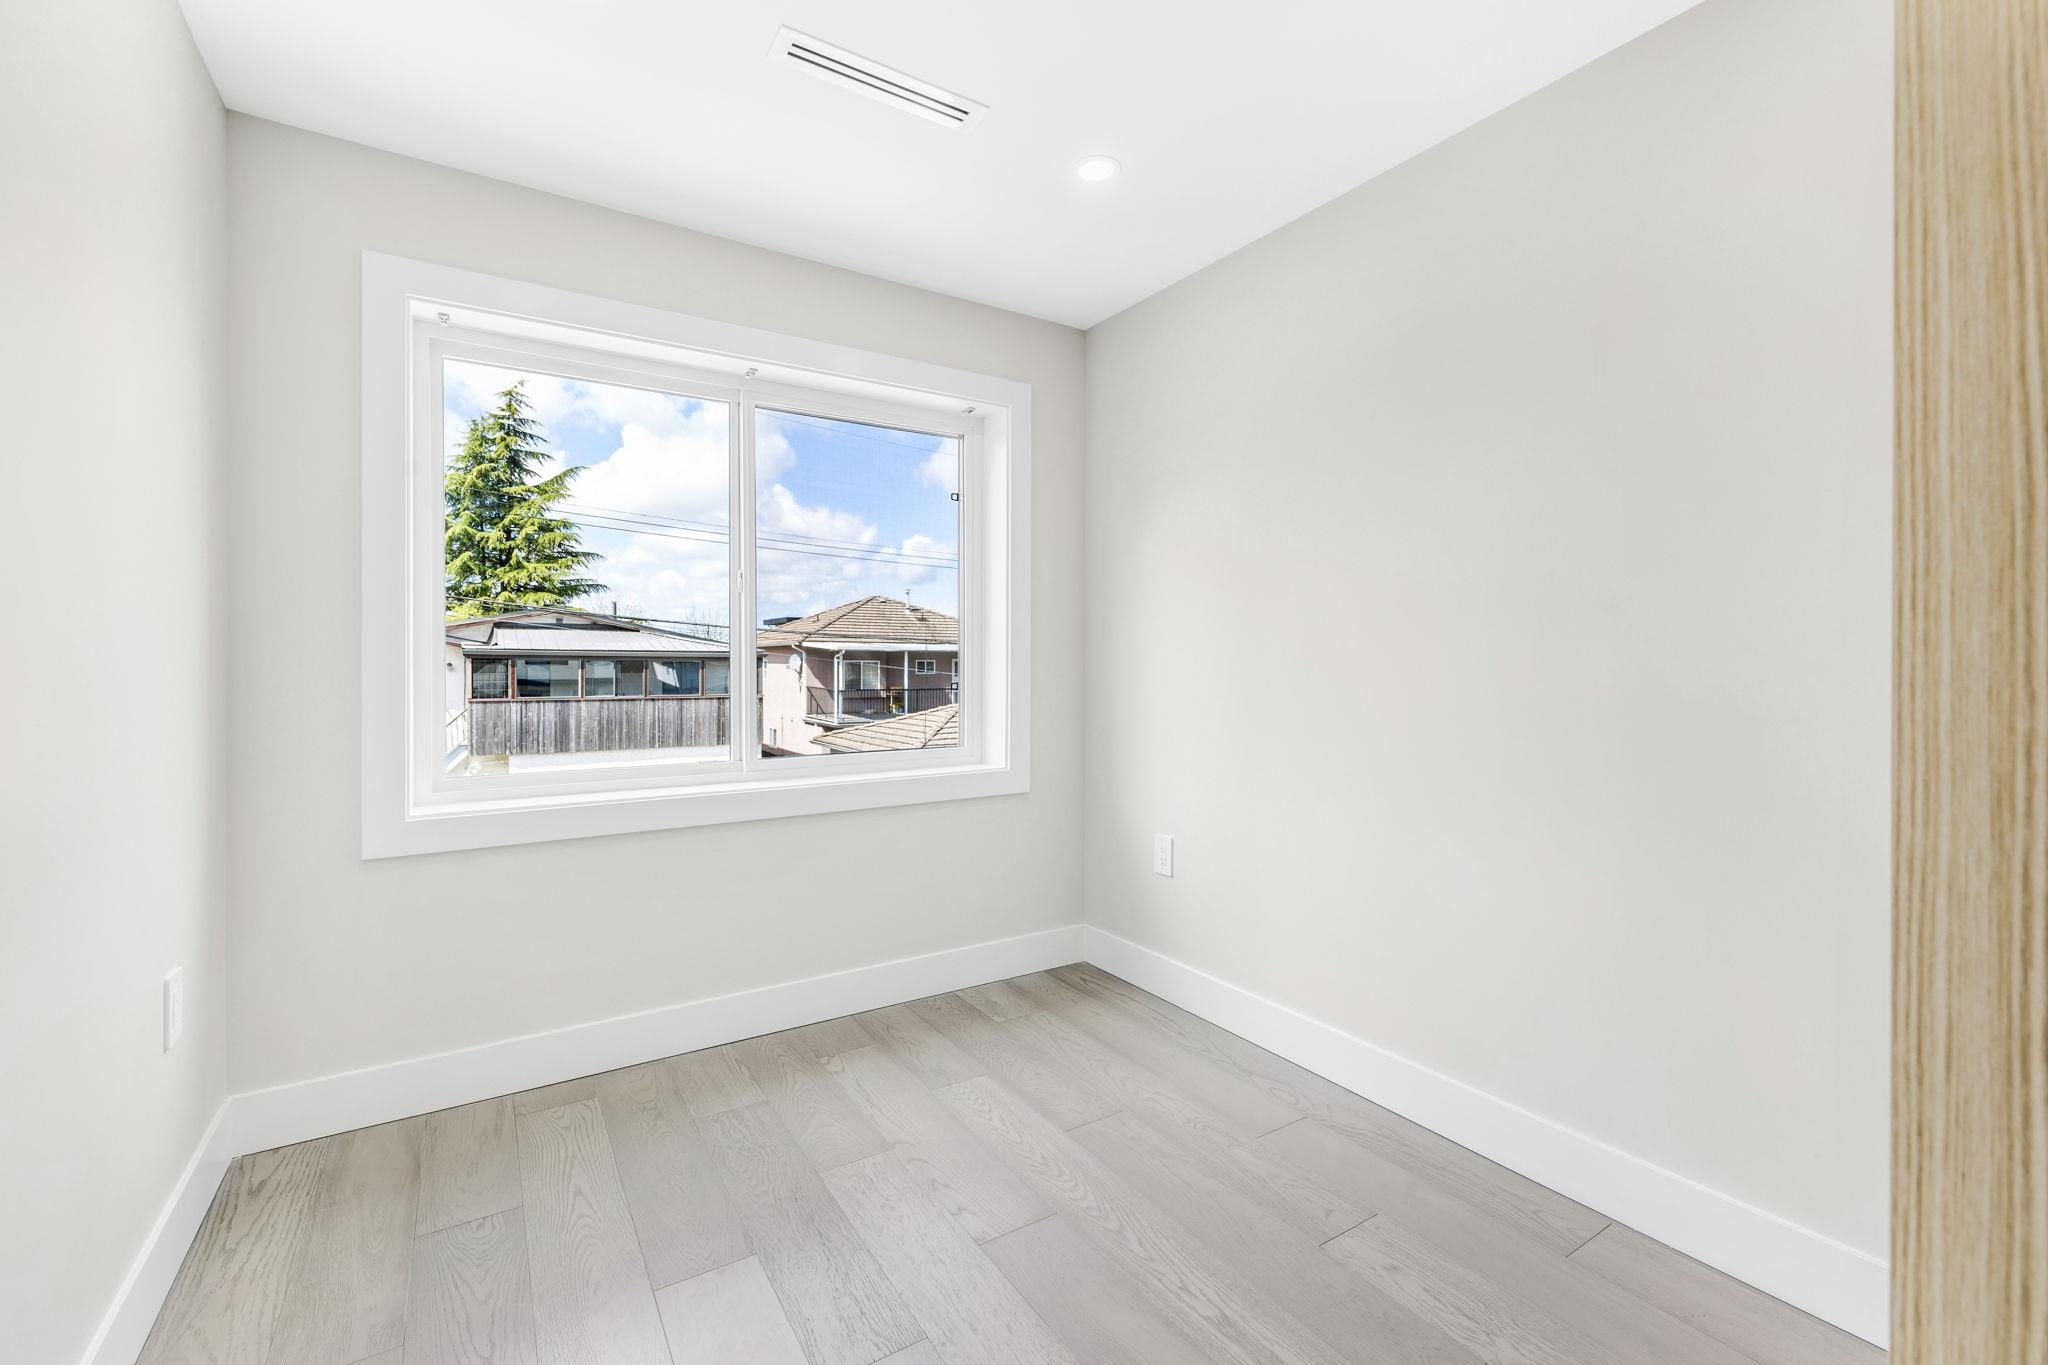 Listing image of 5061 CLARENDON STREET